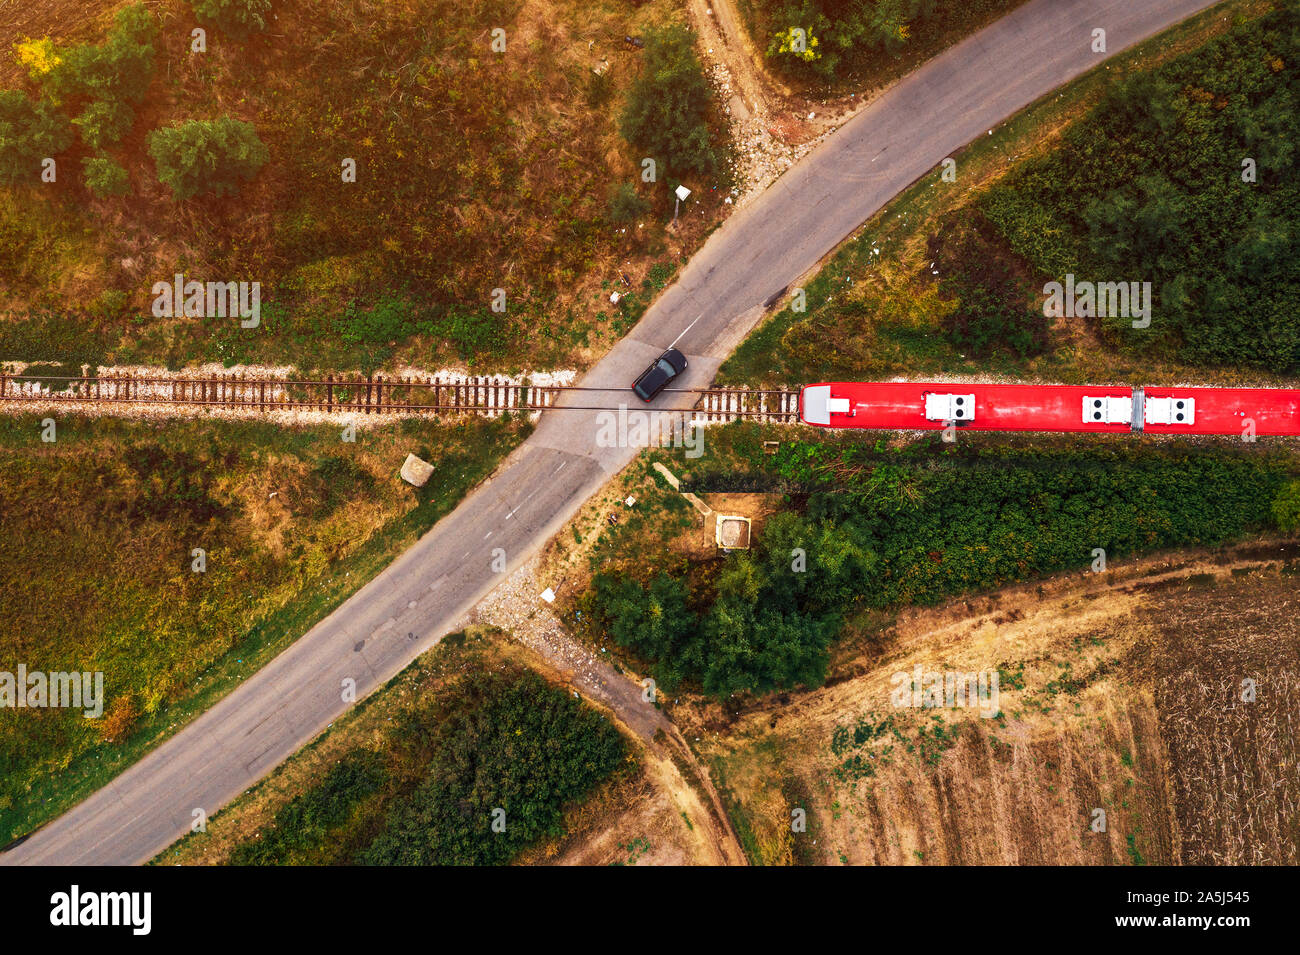 Aerial view of car and train on road and railway junction second before traffic accident Stock Photo